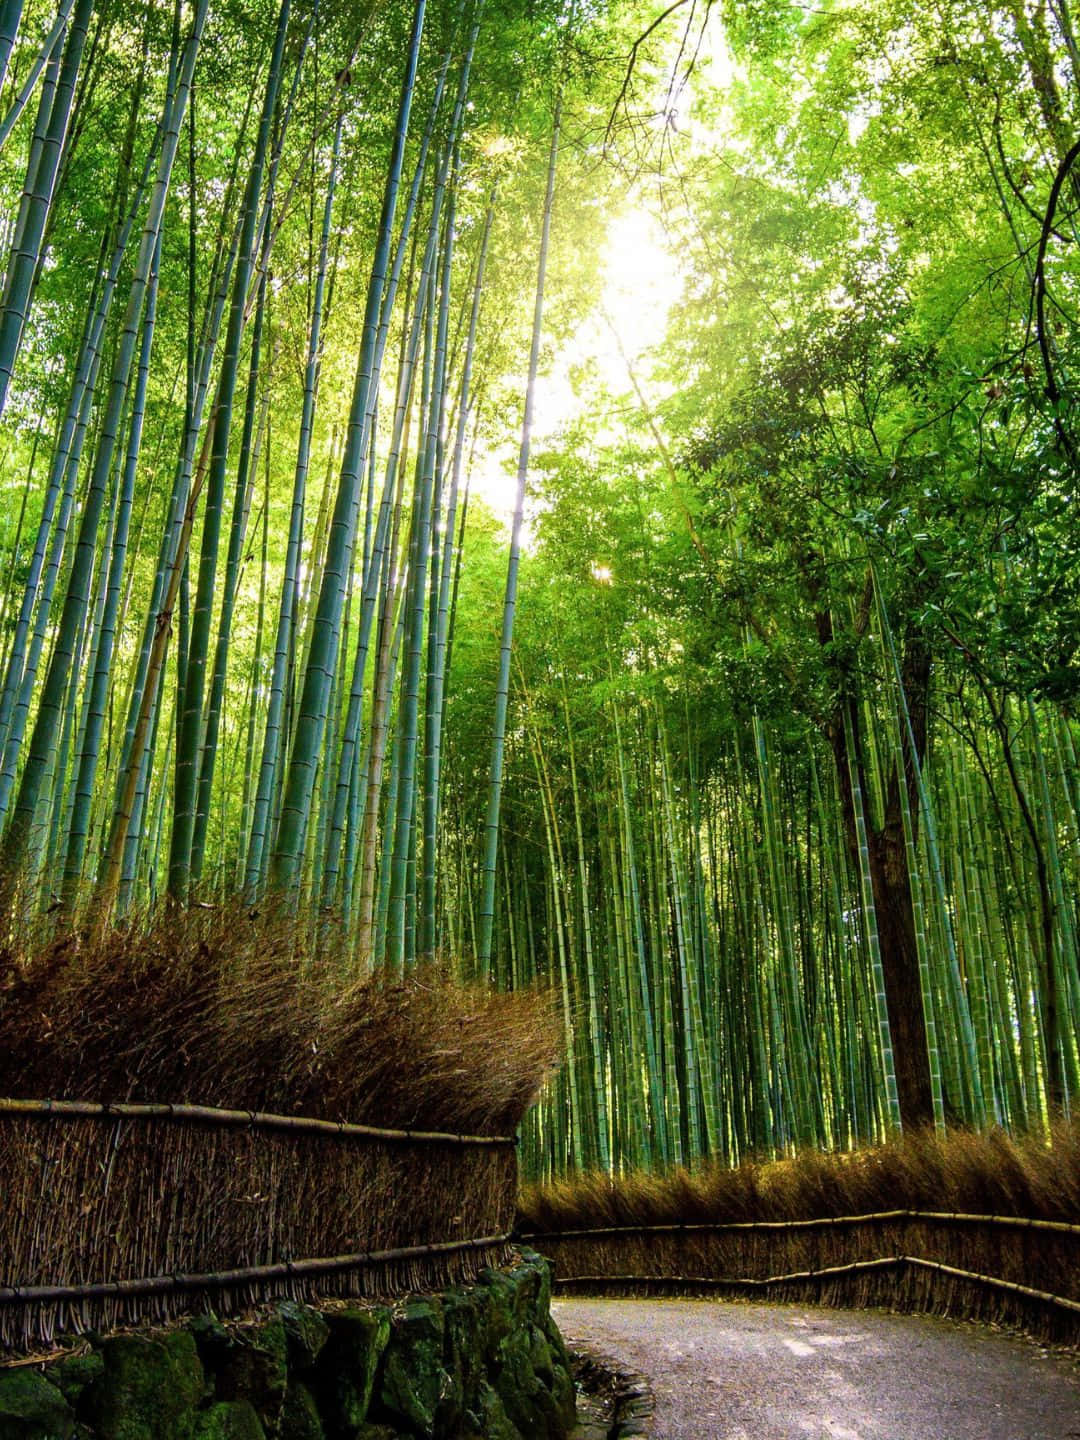 1440p Bamboo Background Road Full Of Bamboo Trees